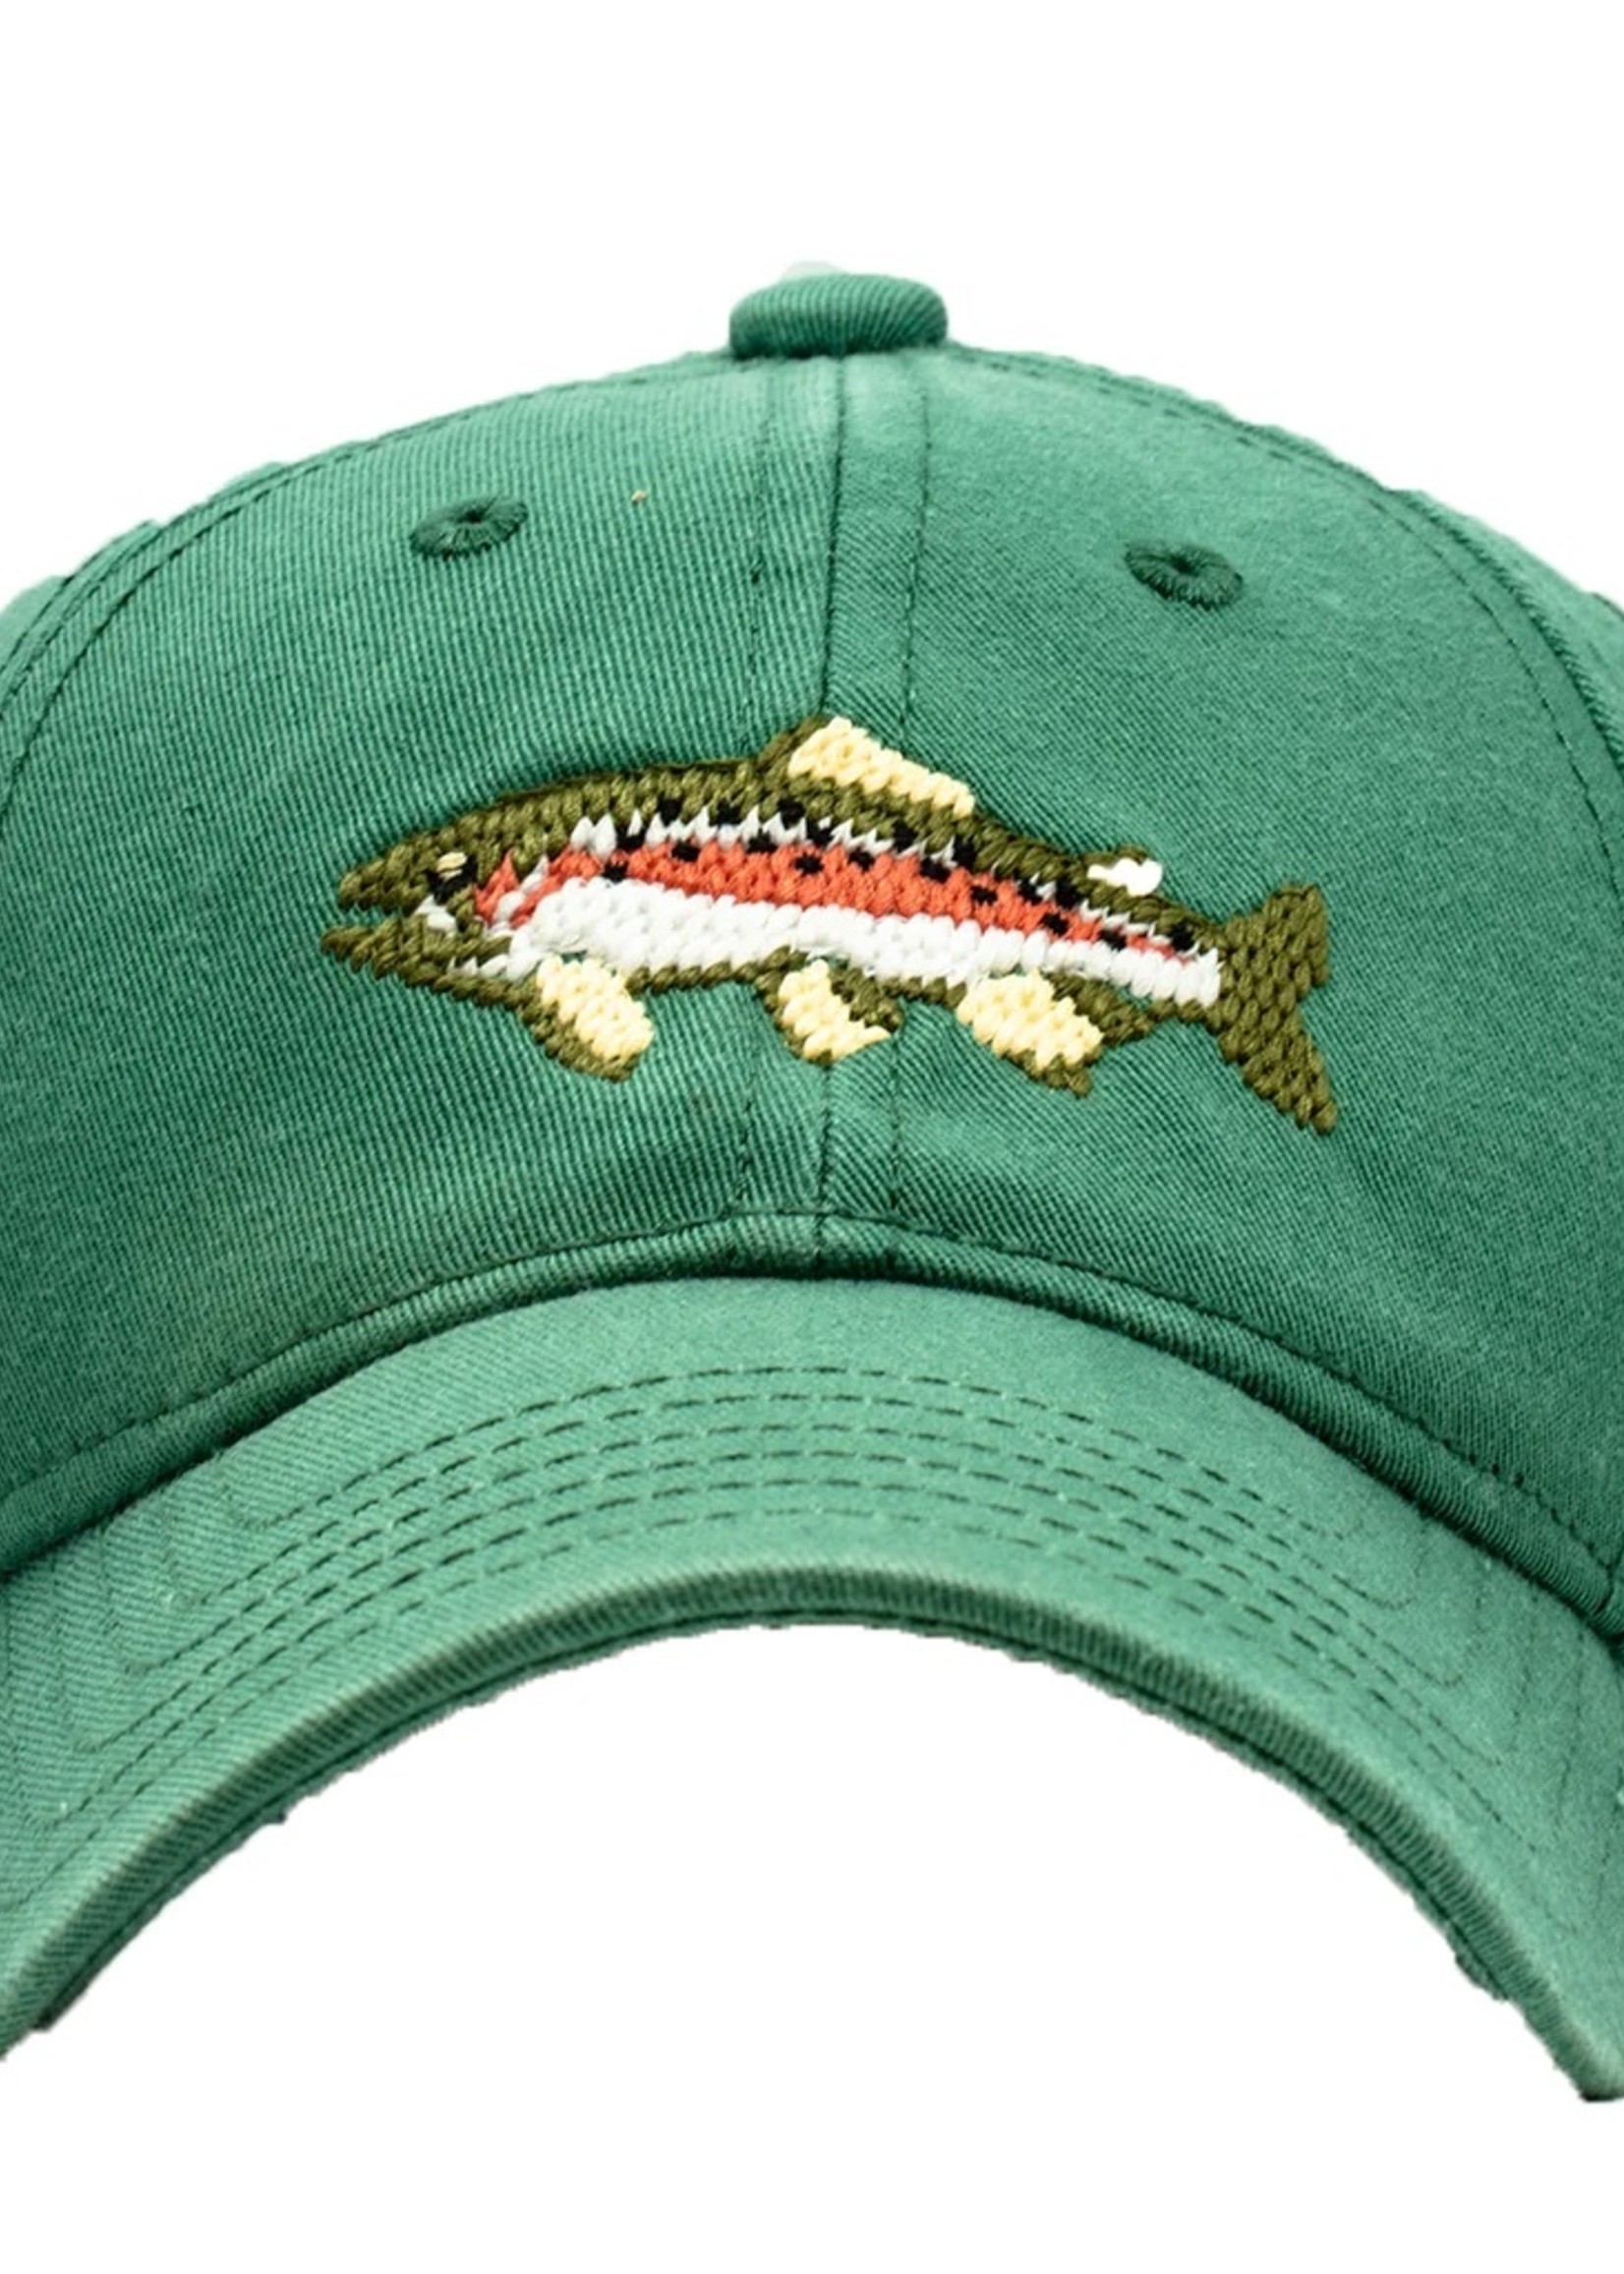 KID TROUT ON MOSS GREEN HAT